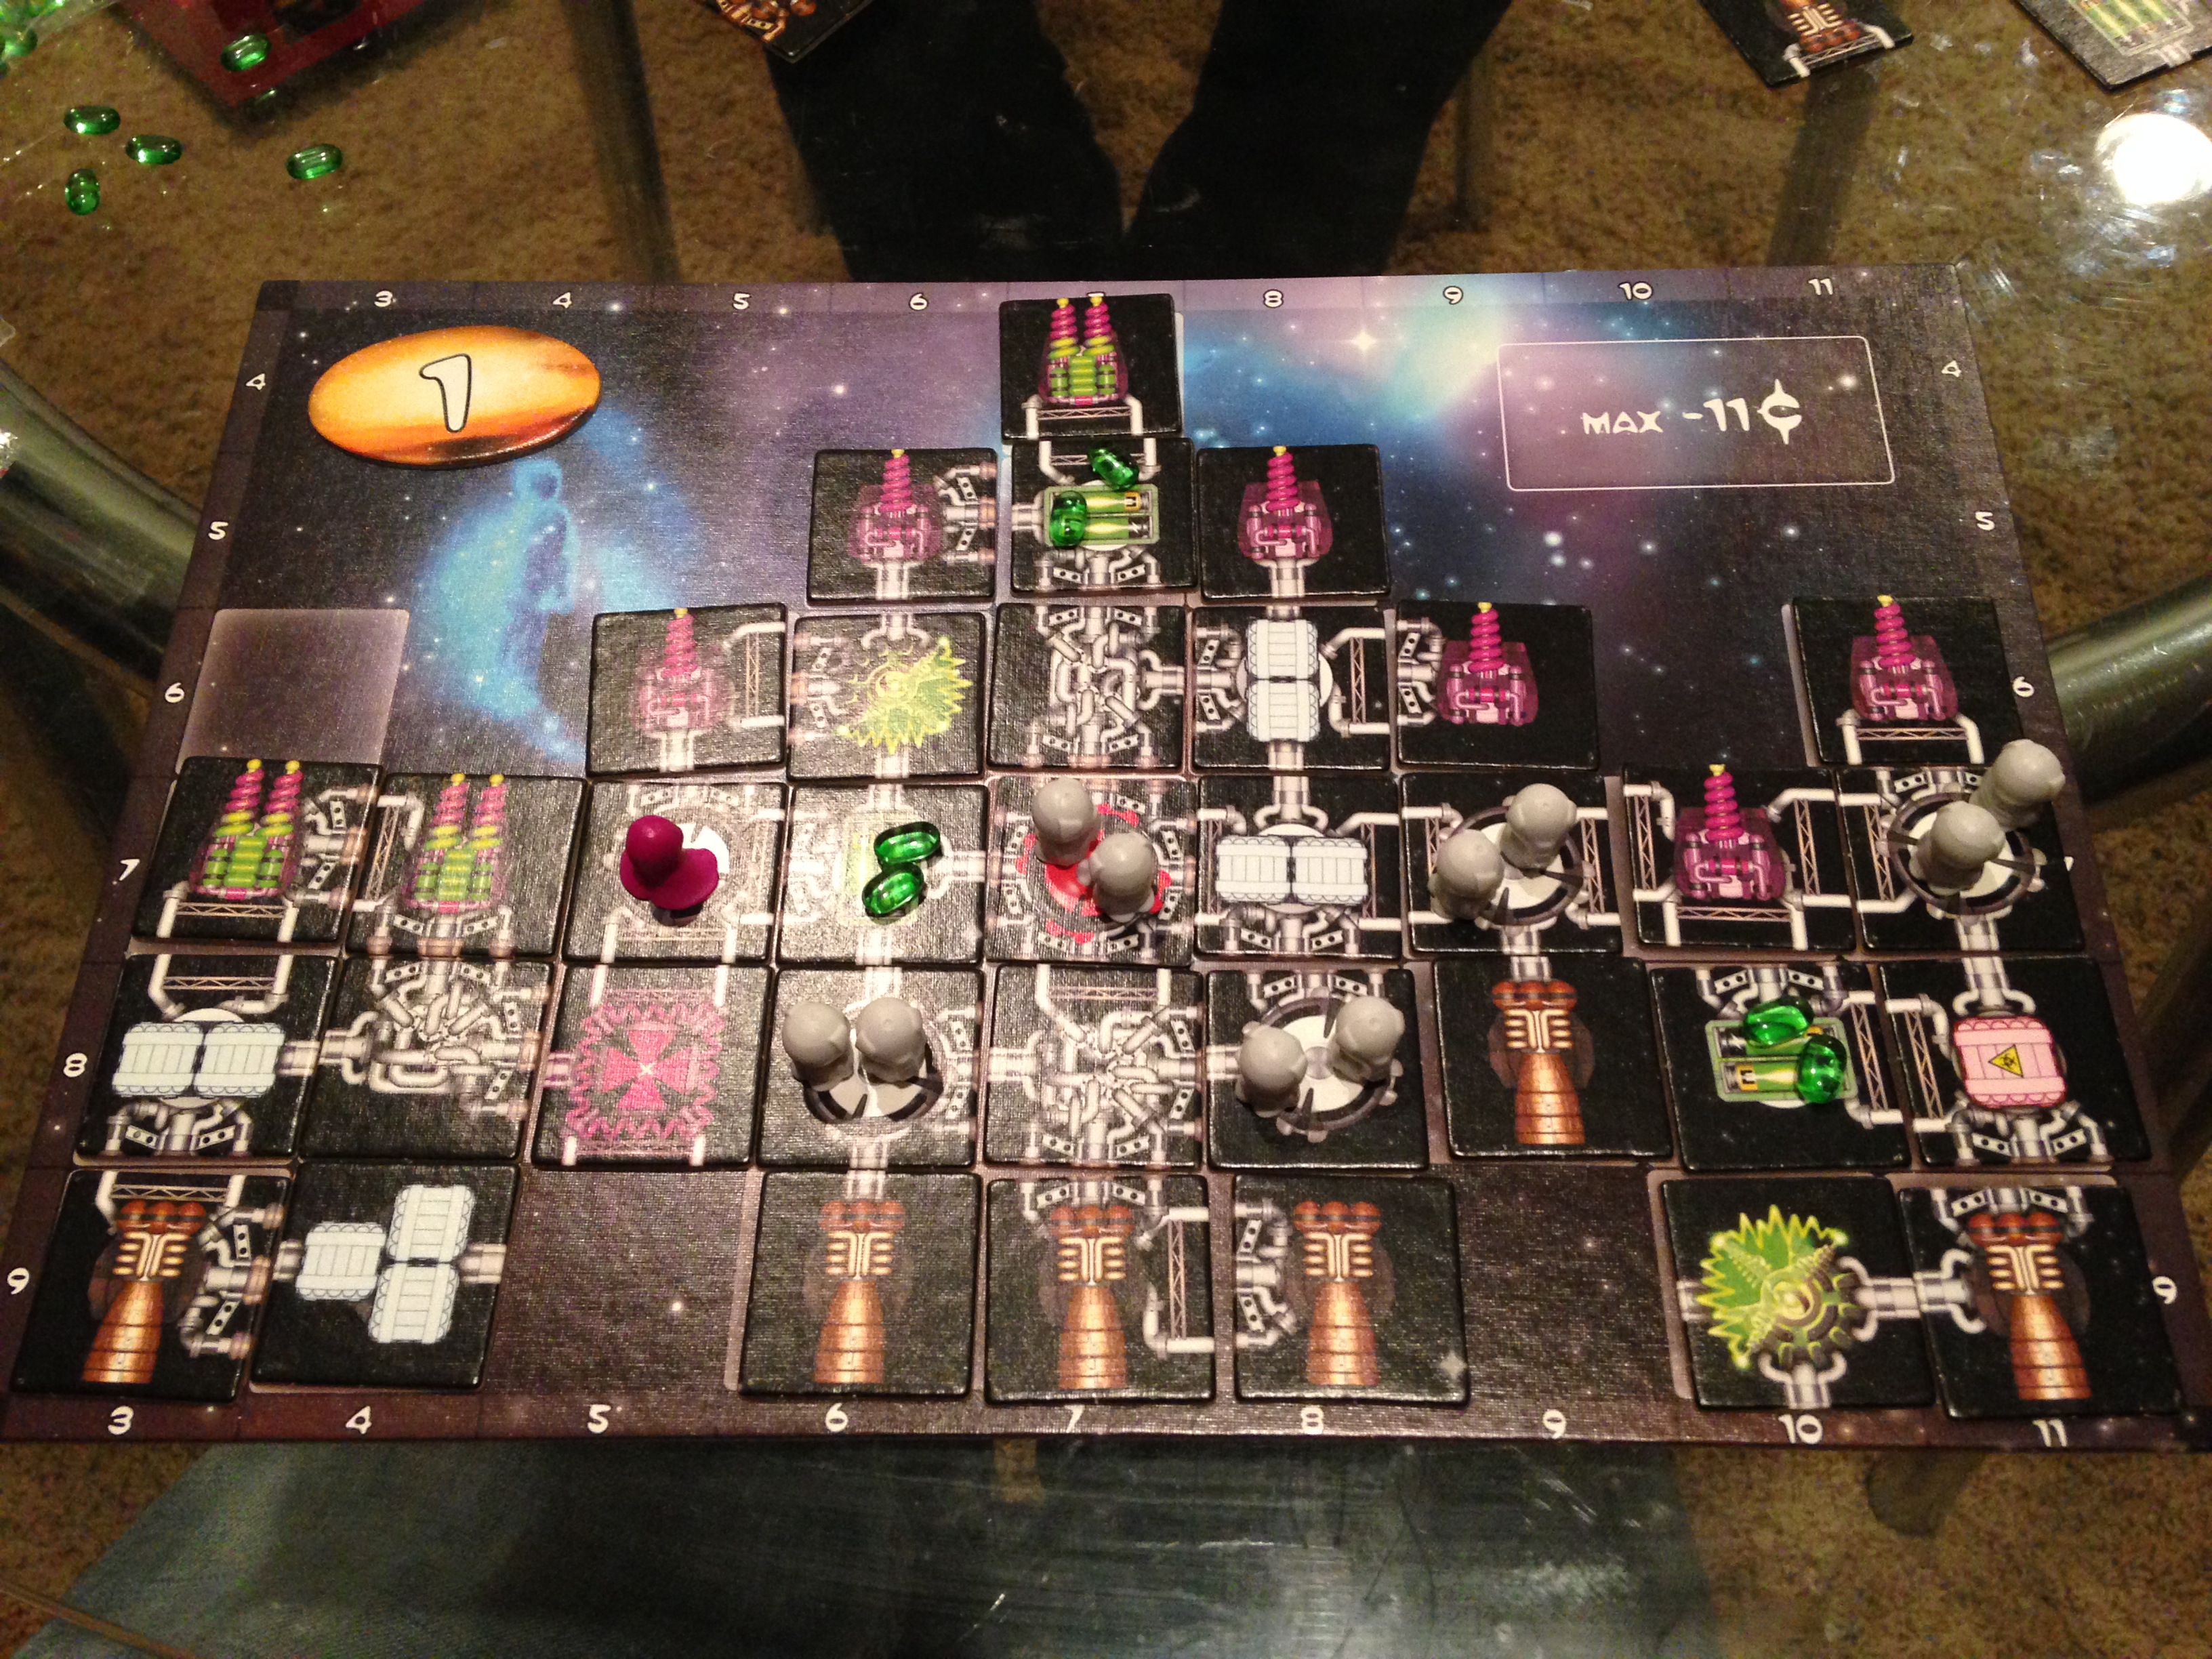 Galaxy Trucker: Extended Edition  no crack